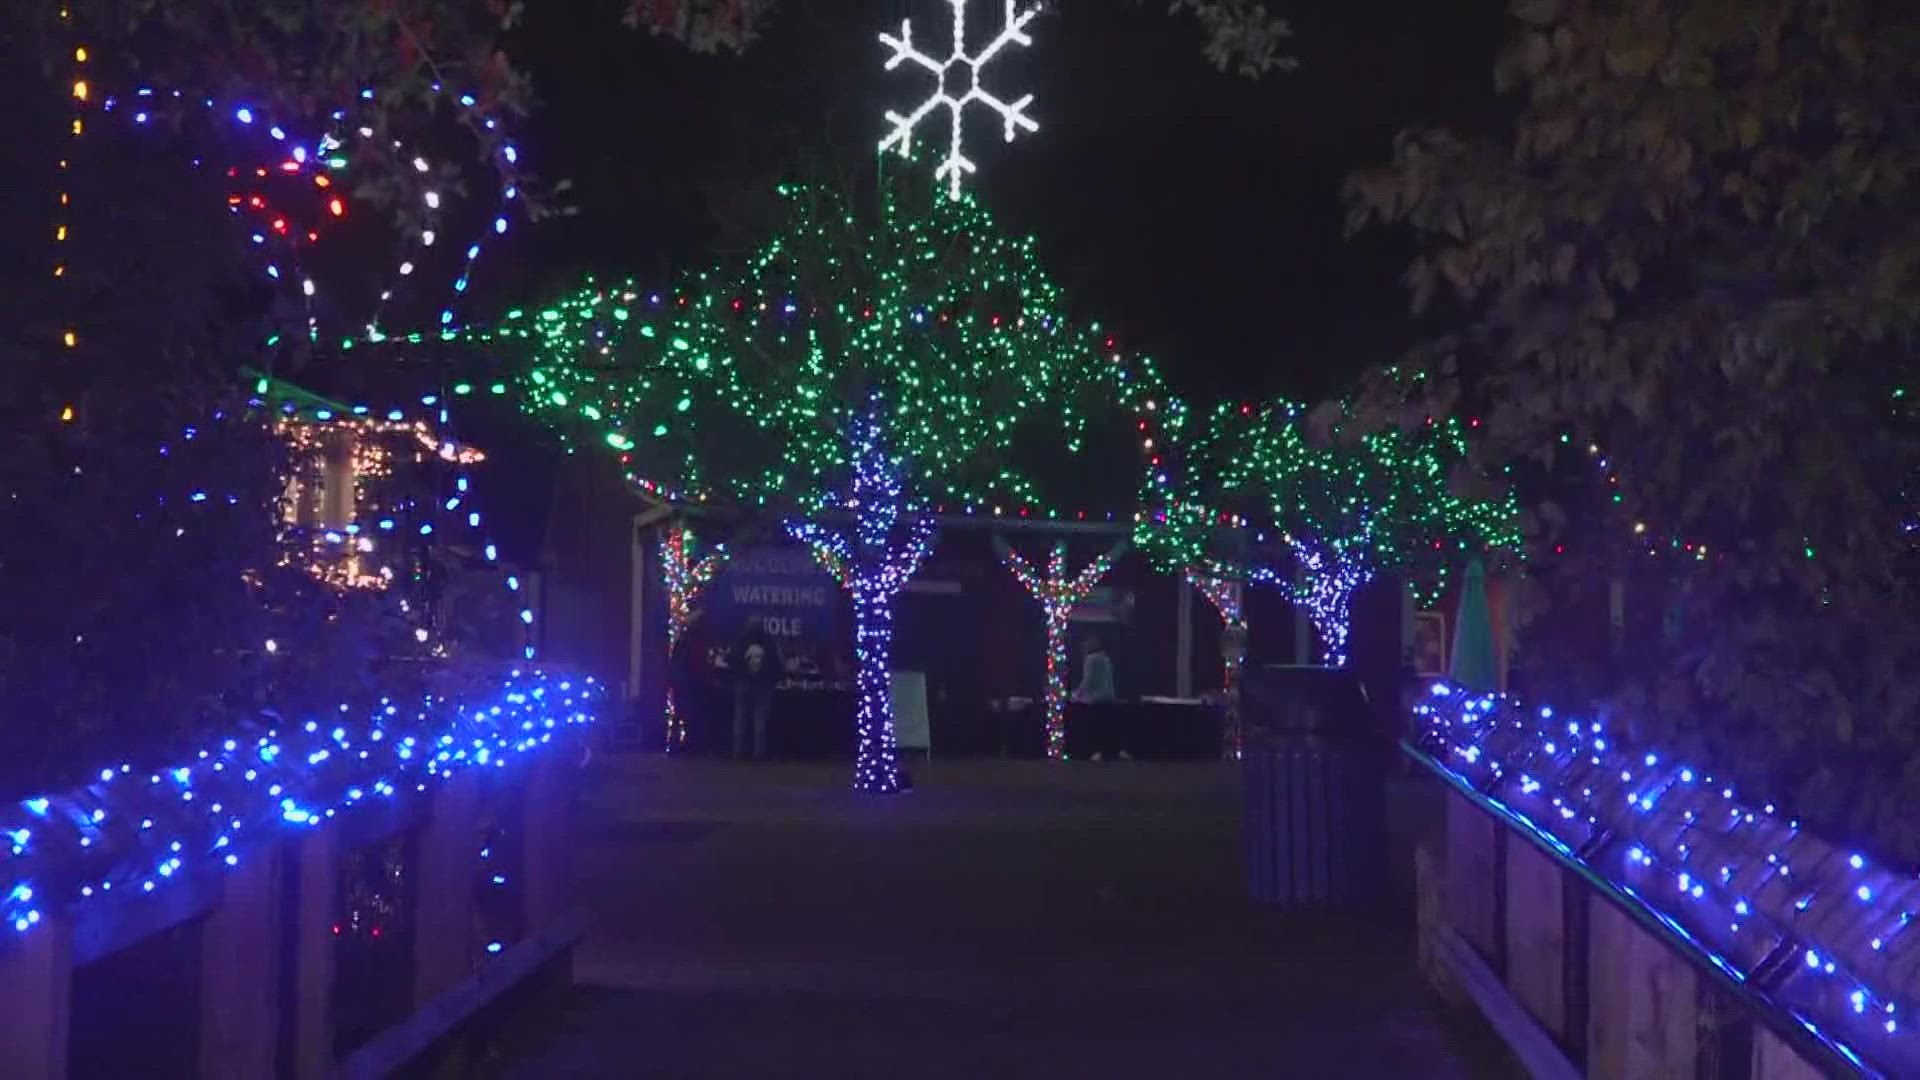 Witness the Cameron Park Zoo decked out with holiday lights during its Wild Lights event, which is happening now.